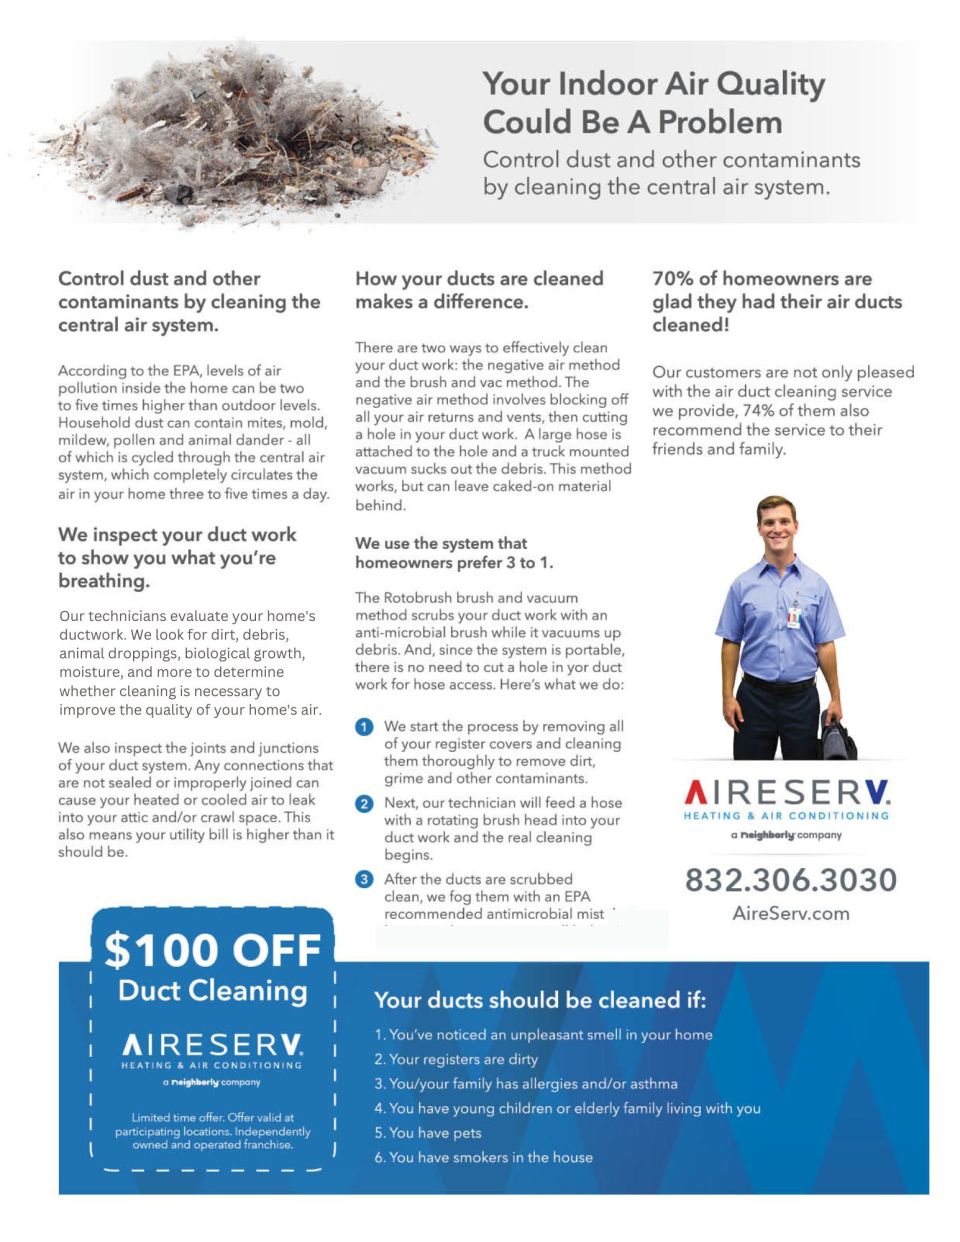 We are so excited to announce the addition of air duct cleaning to Air Serv to go with our wonderful indoor air quality solutions. Feel free to reach out with any questions.